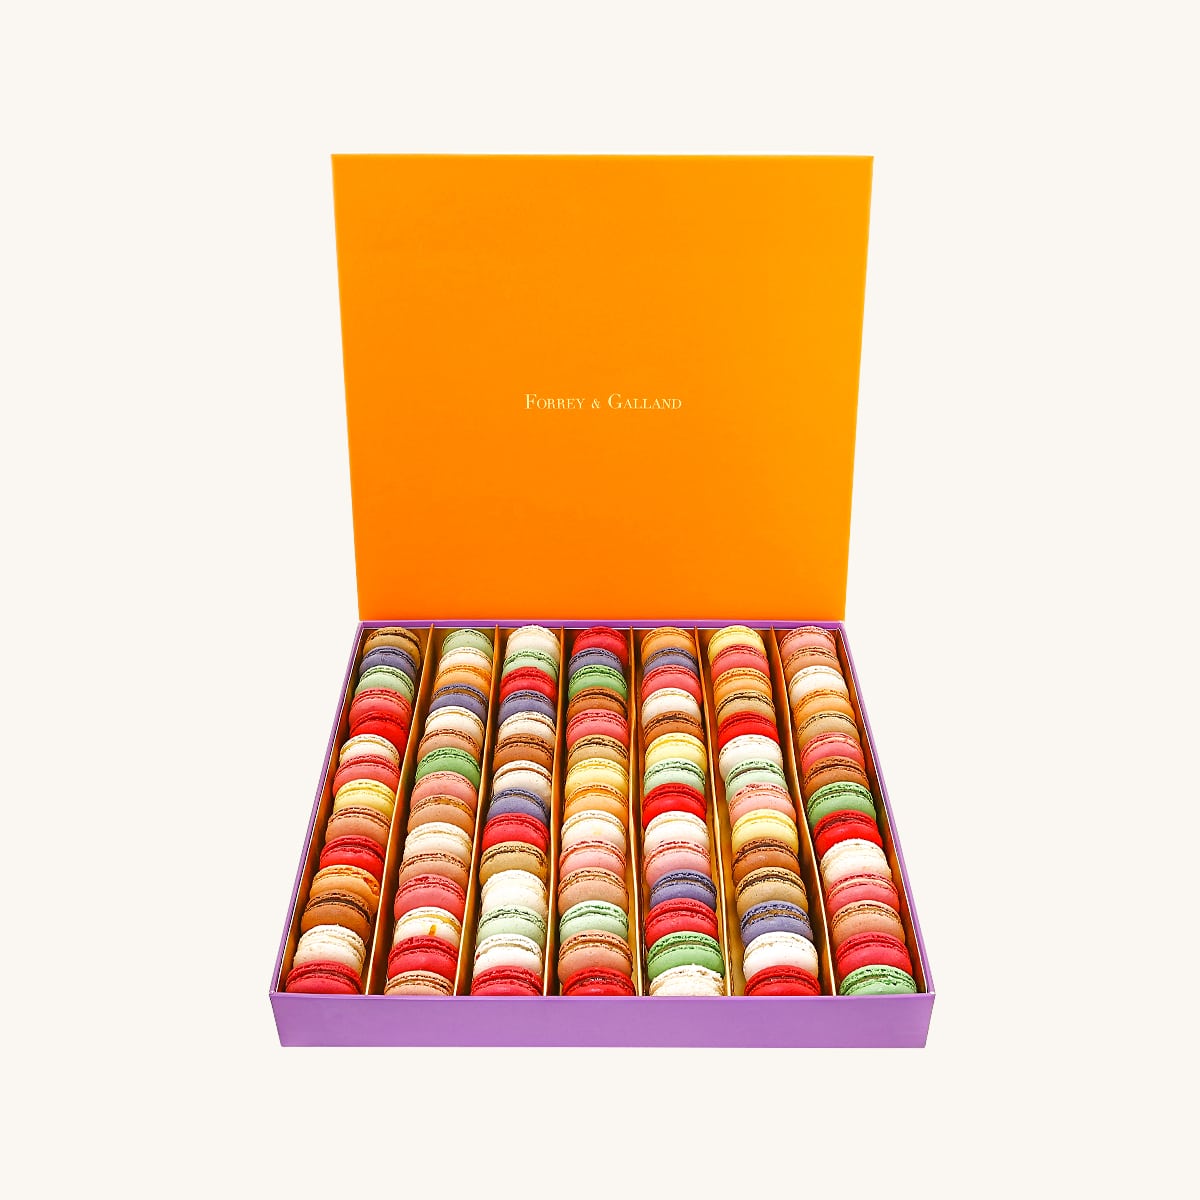 Forrey & Galland elegant gift box filled with 84 pieces of handmade mini premium macarons